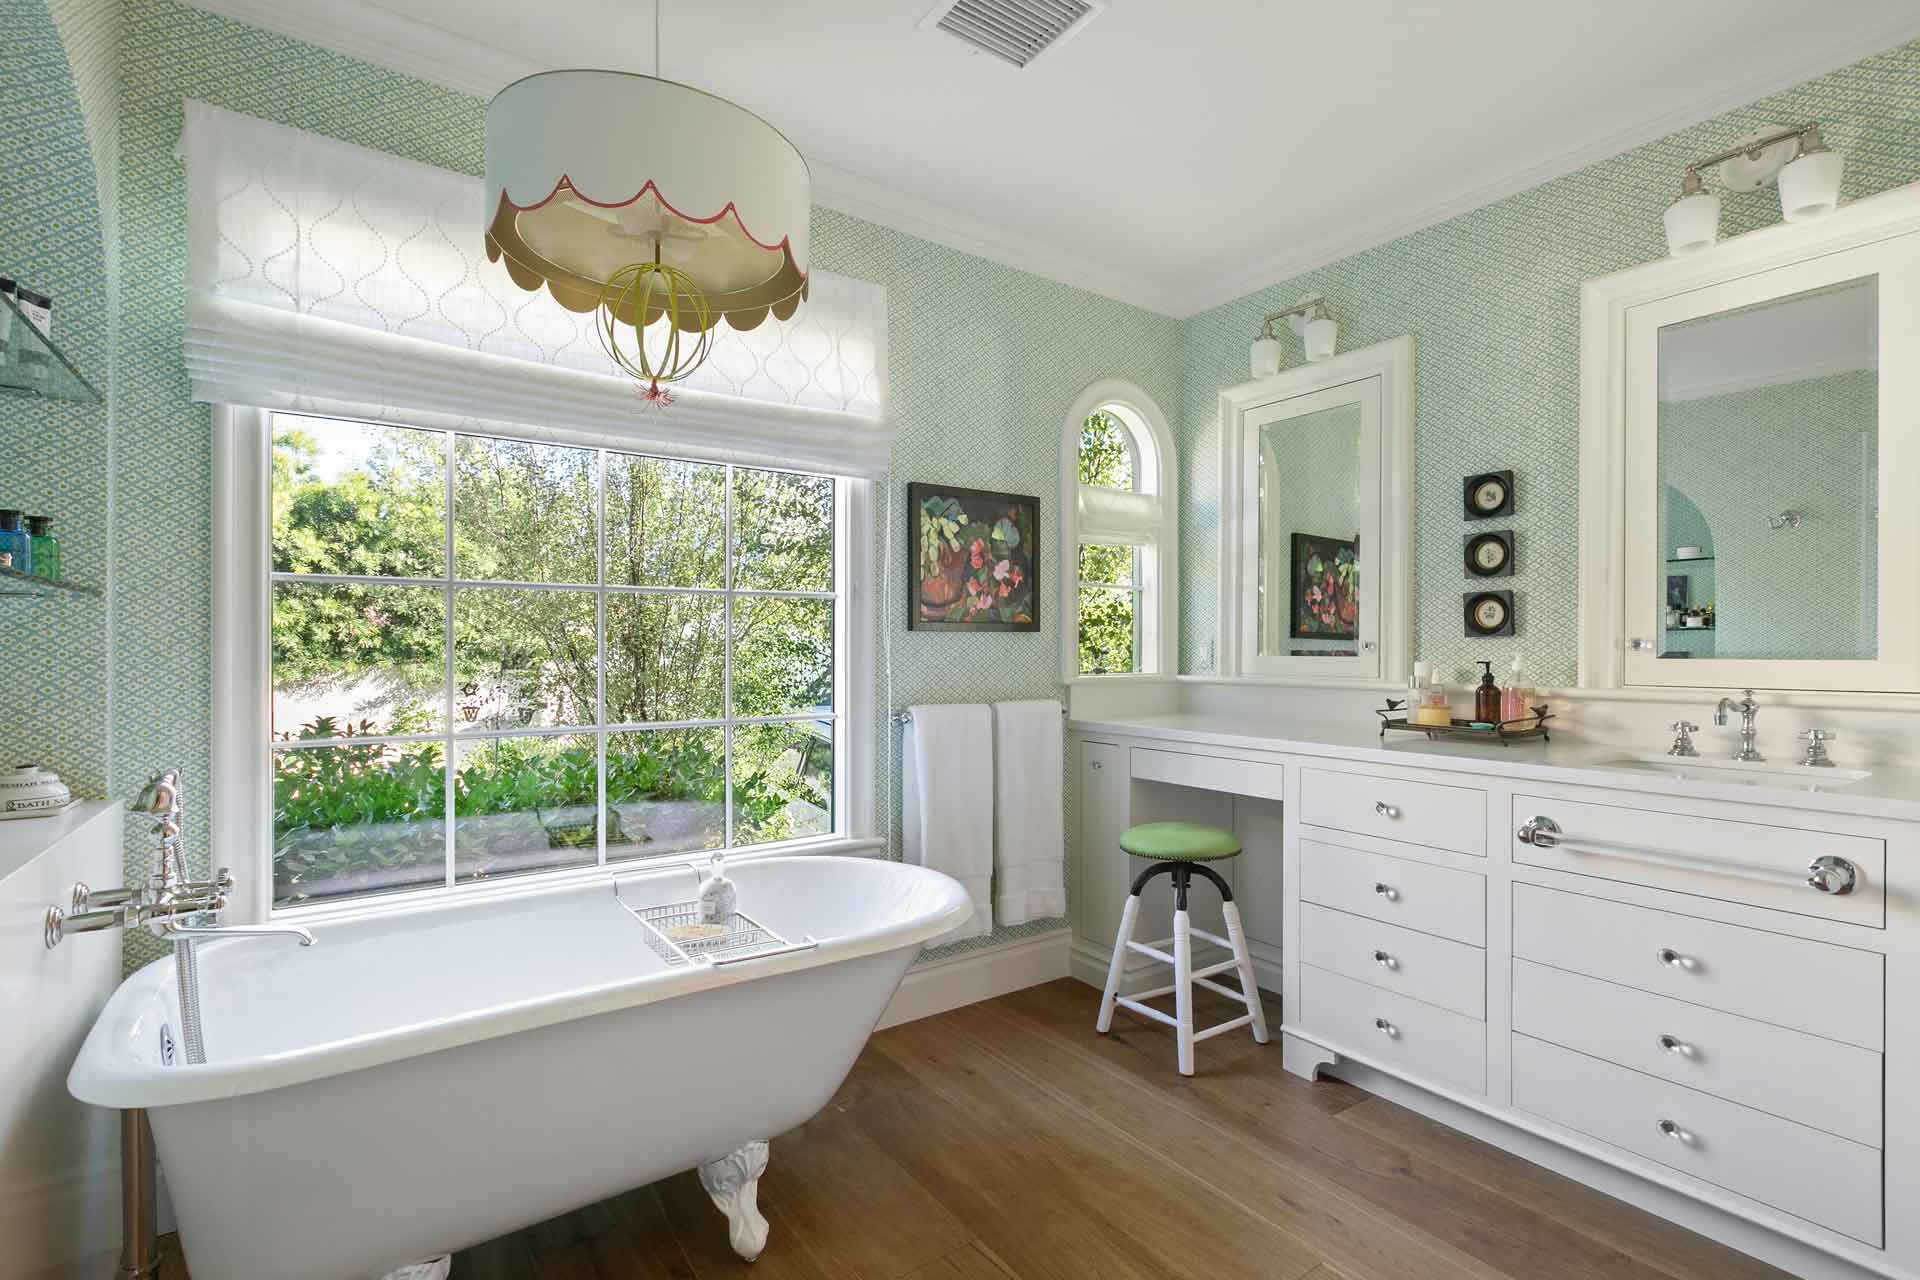 Large bathroom with rolltop bath, white cabinets and green patterned wallpaper.